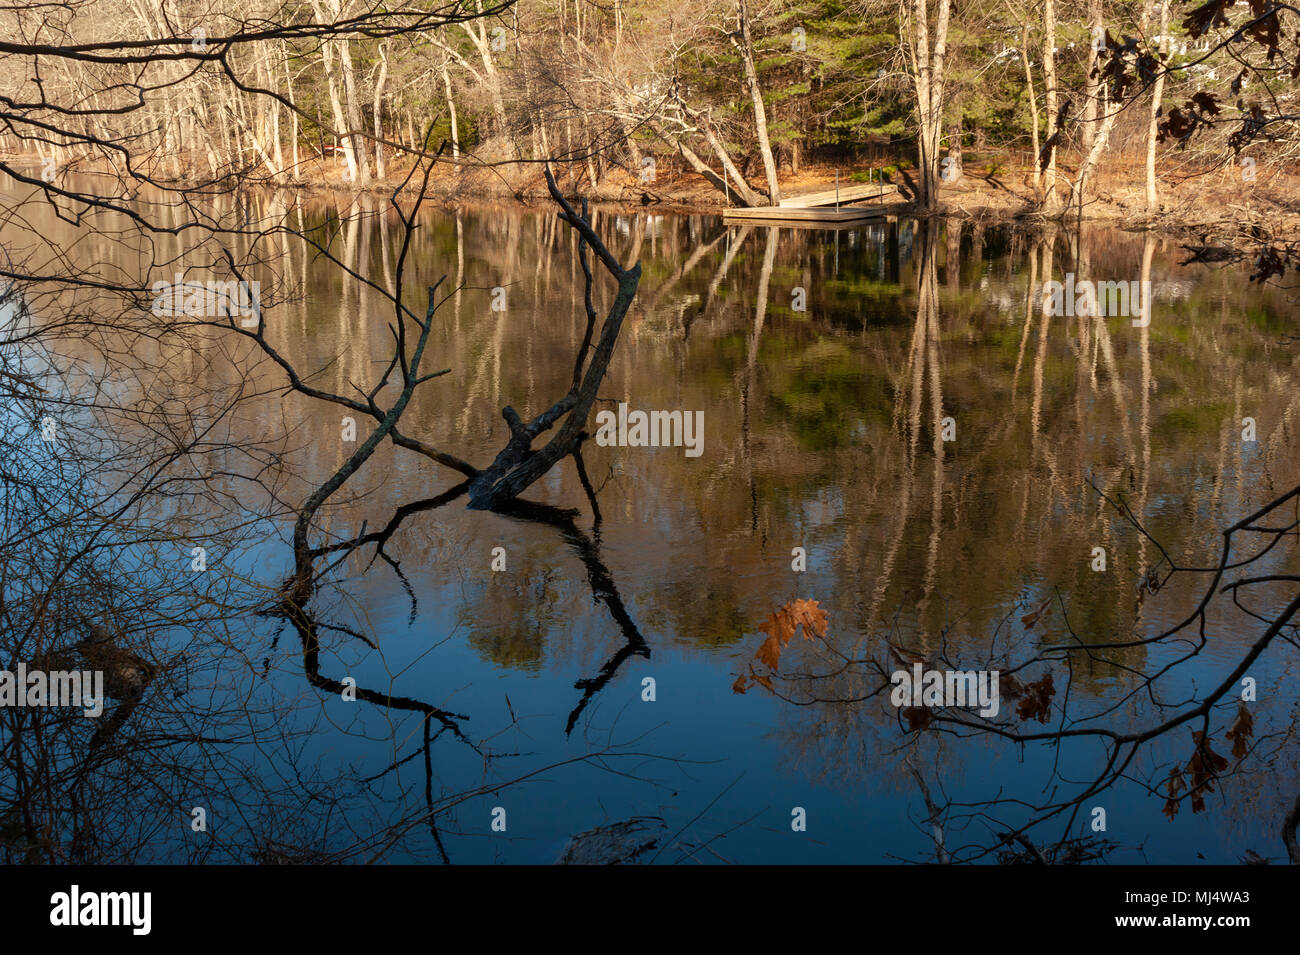 Landscape with leafless trees and partial submerged logs on the riverbanks of Charles River. Elm Bank Reservation, Wellesley, MA Stock Photo